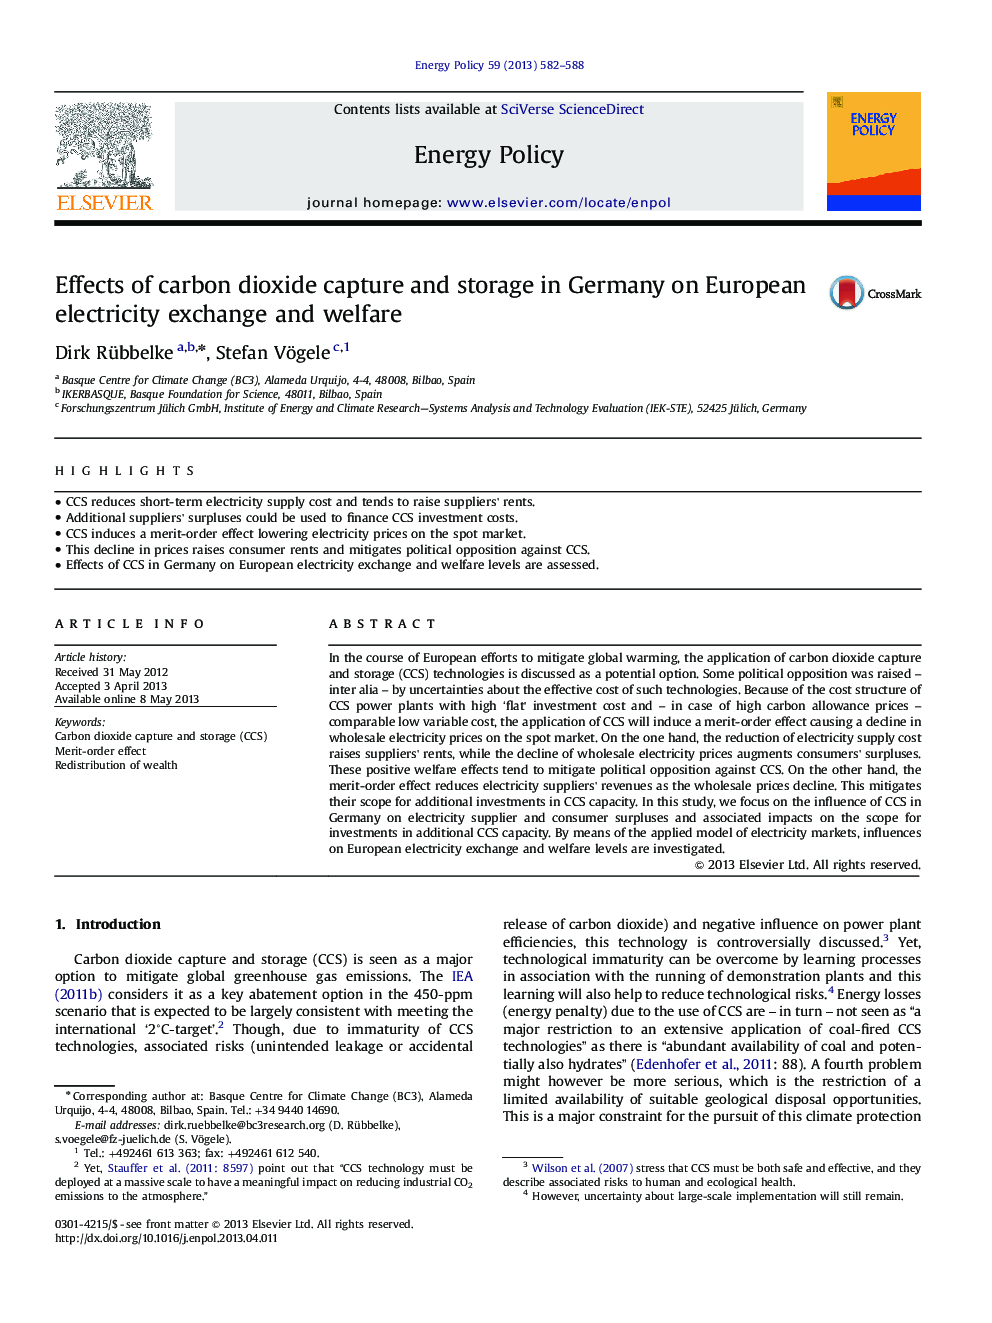 Effects of carbon dioxide capture and storage in Germany on European electricity exchange and welfare